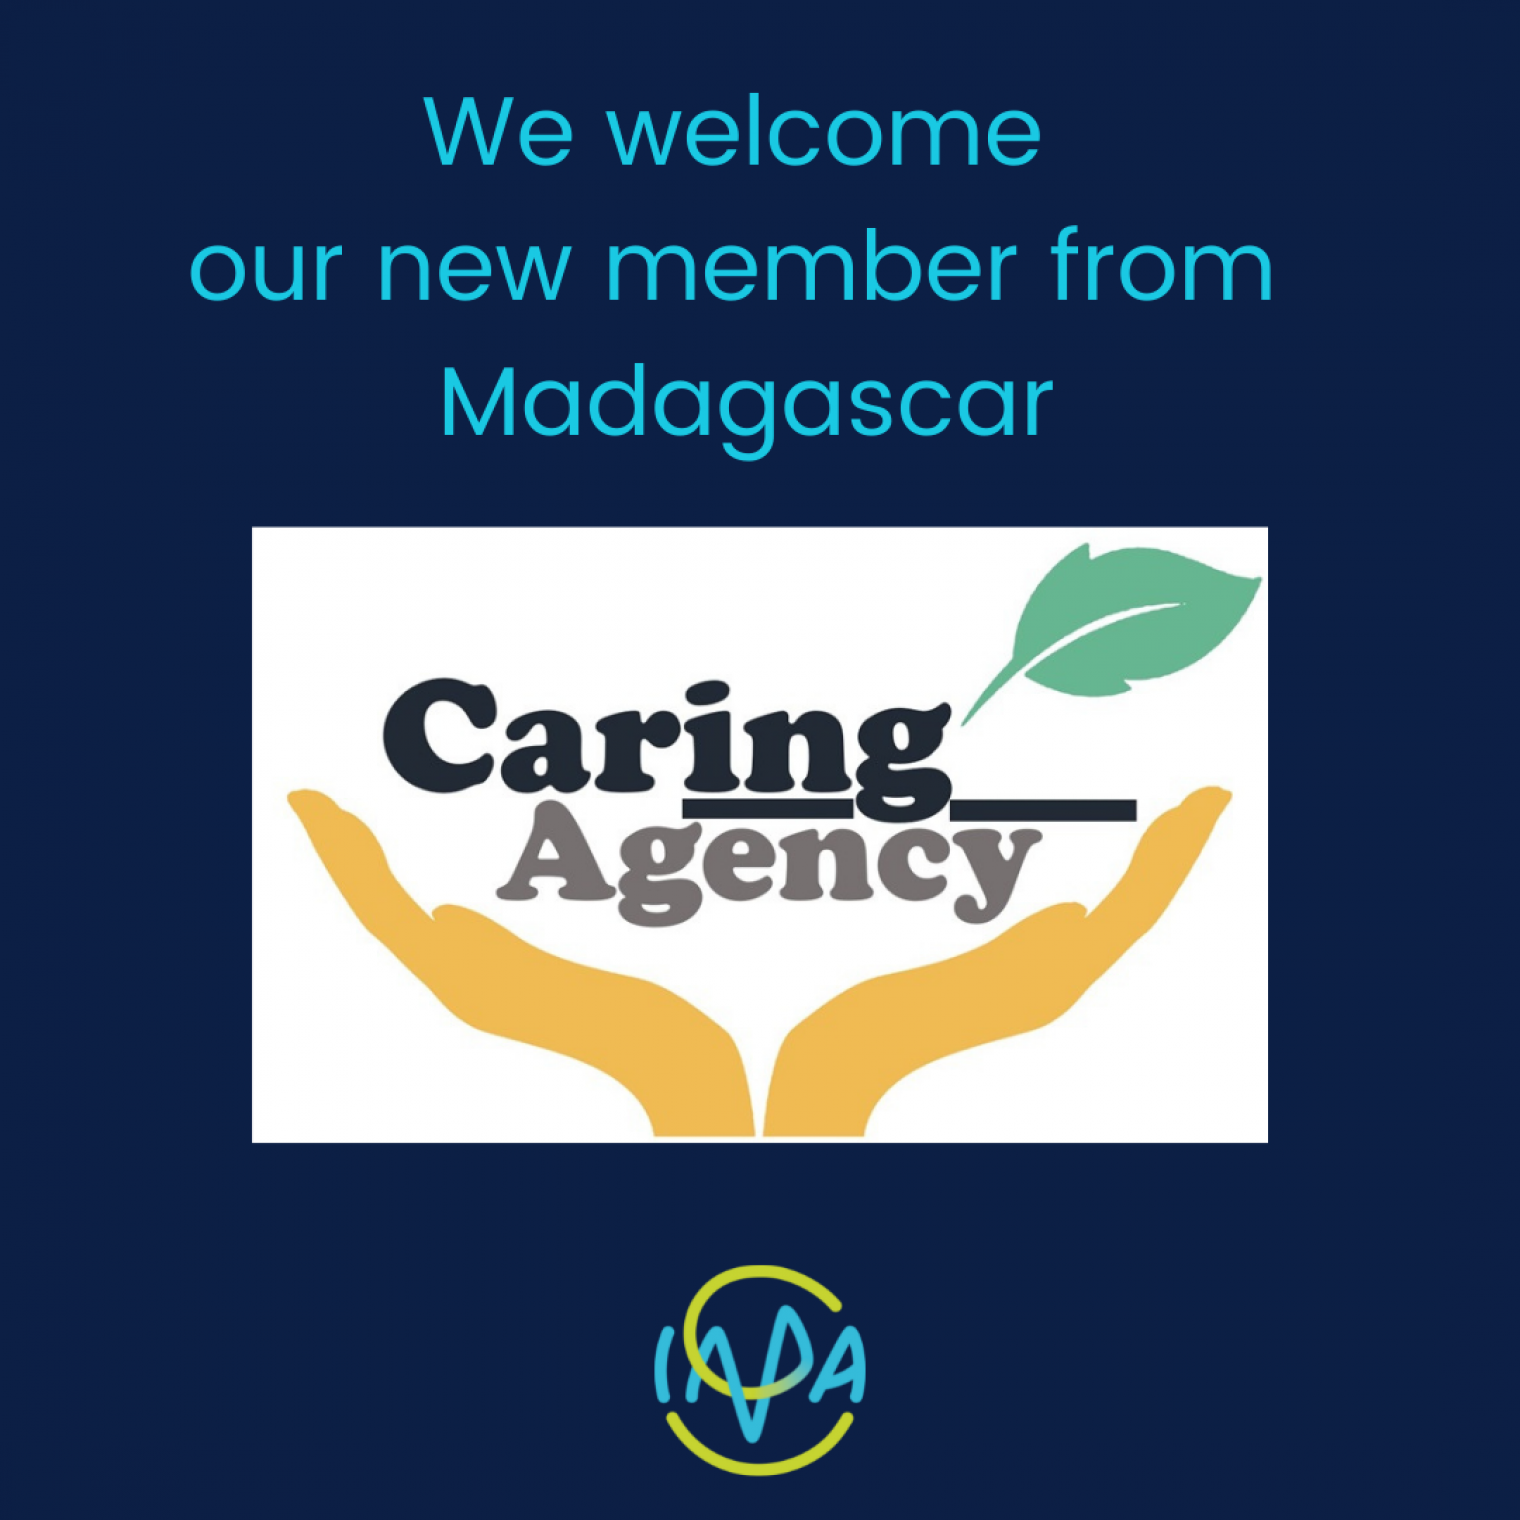 Welcome to our first affiliate member from Madagascar: CaringAgency